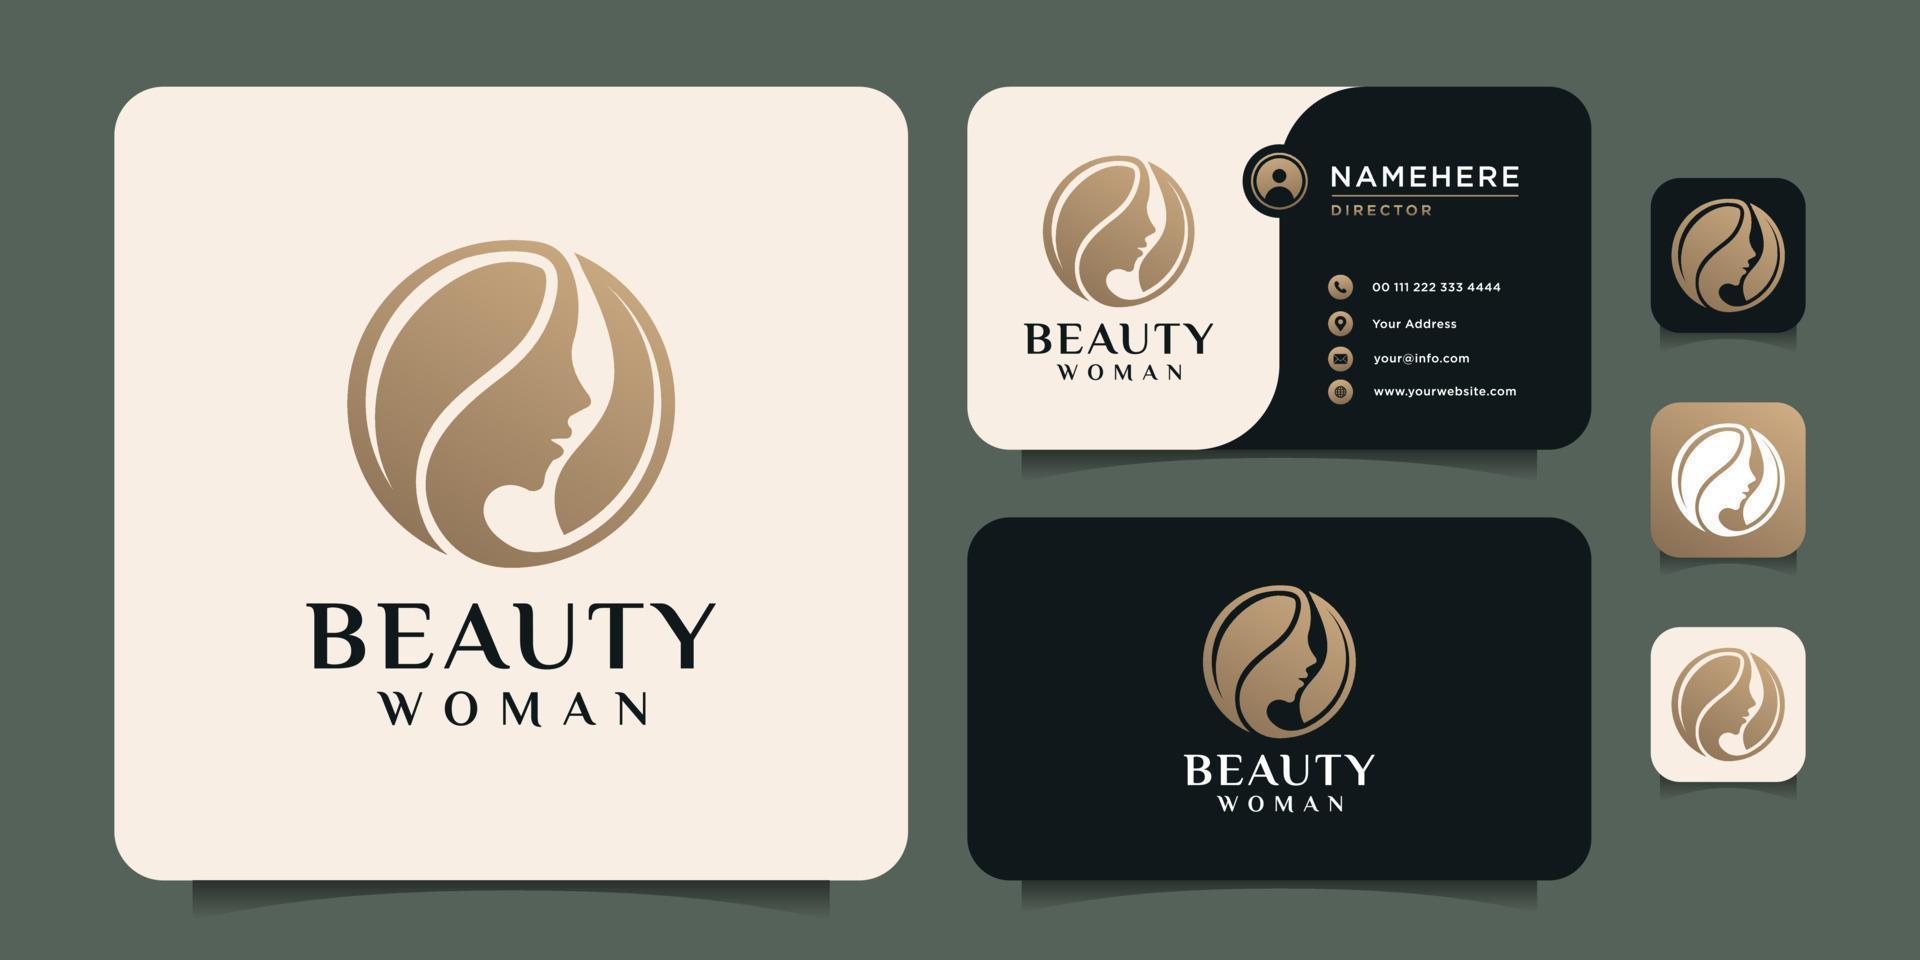 Beauty hairstyle woman face nature fashion silhouette logo design vector